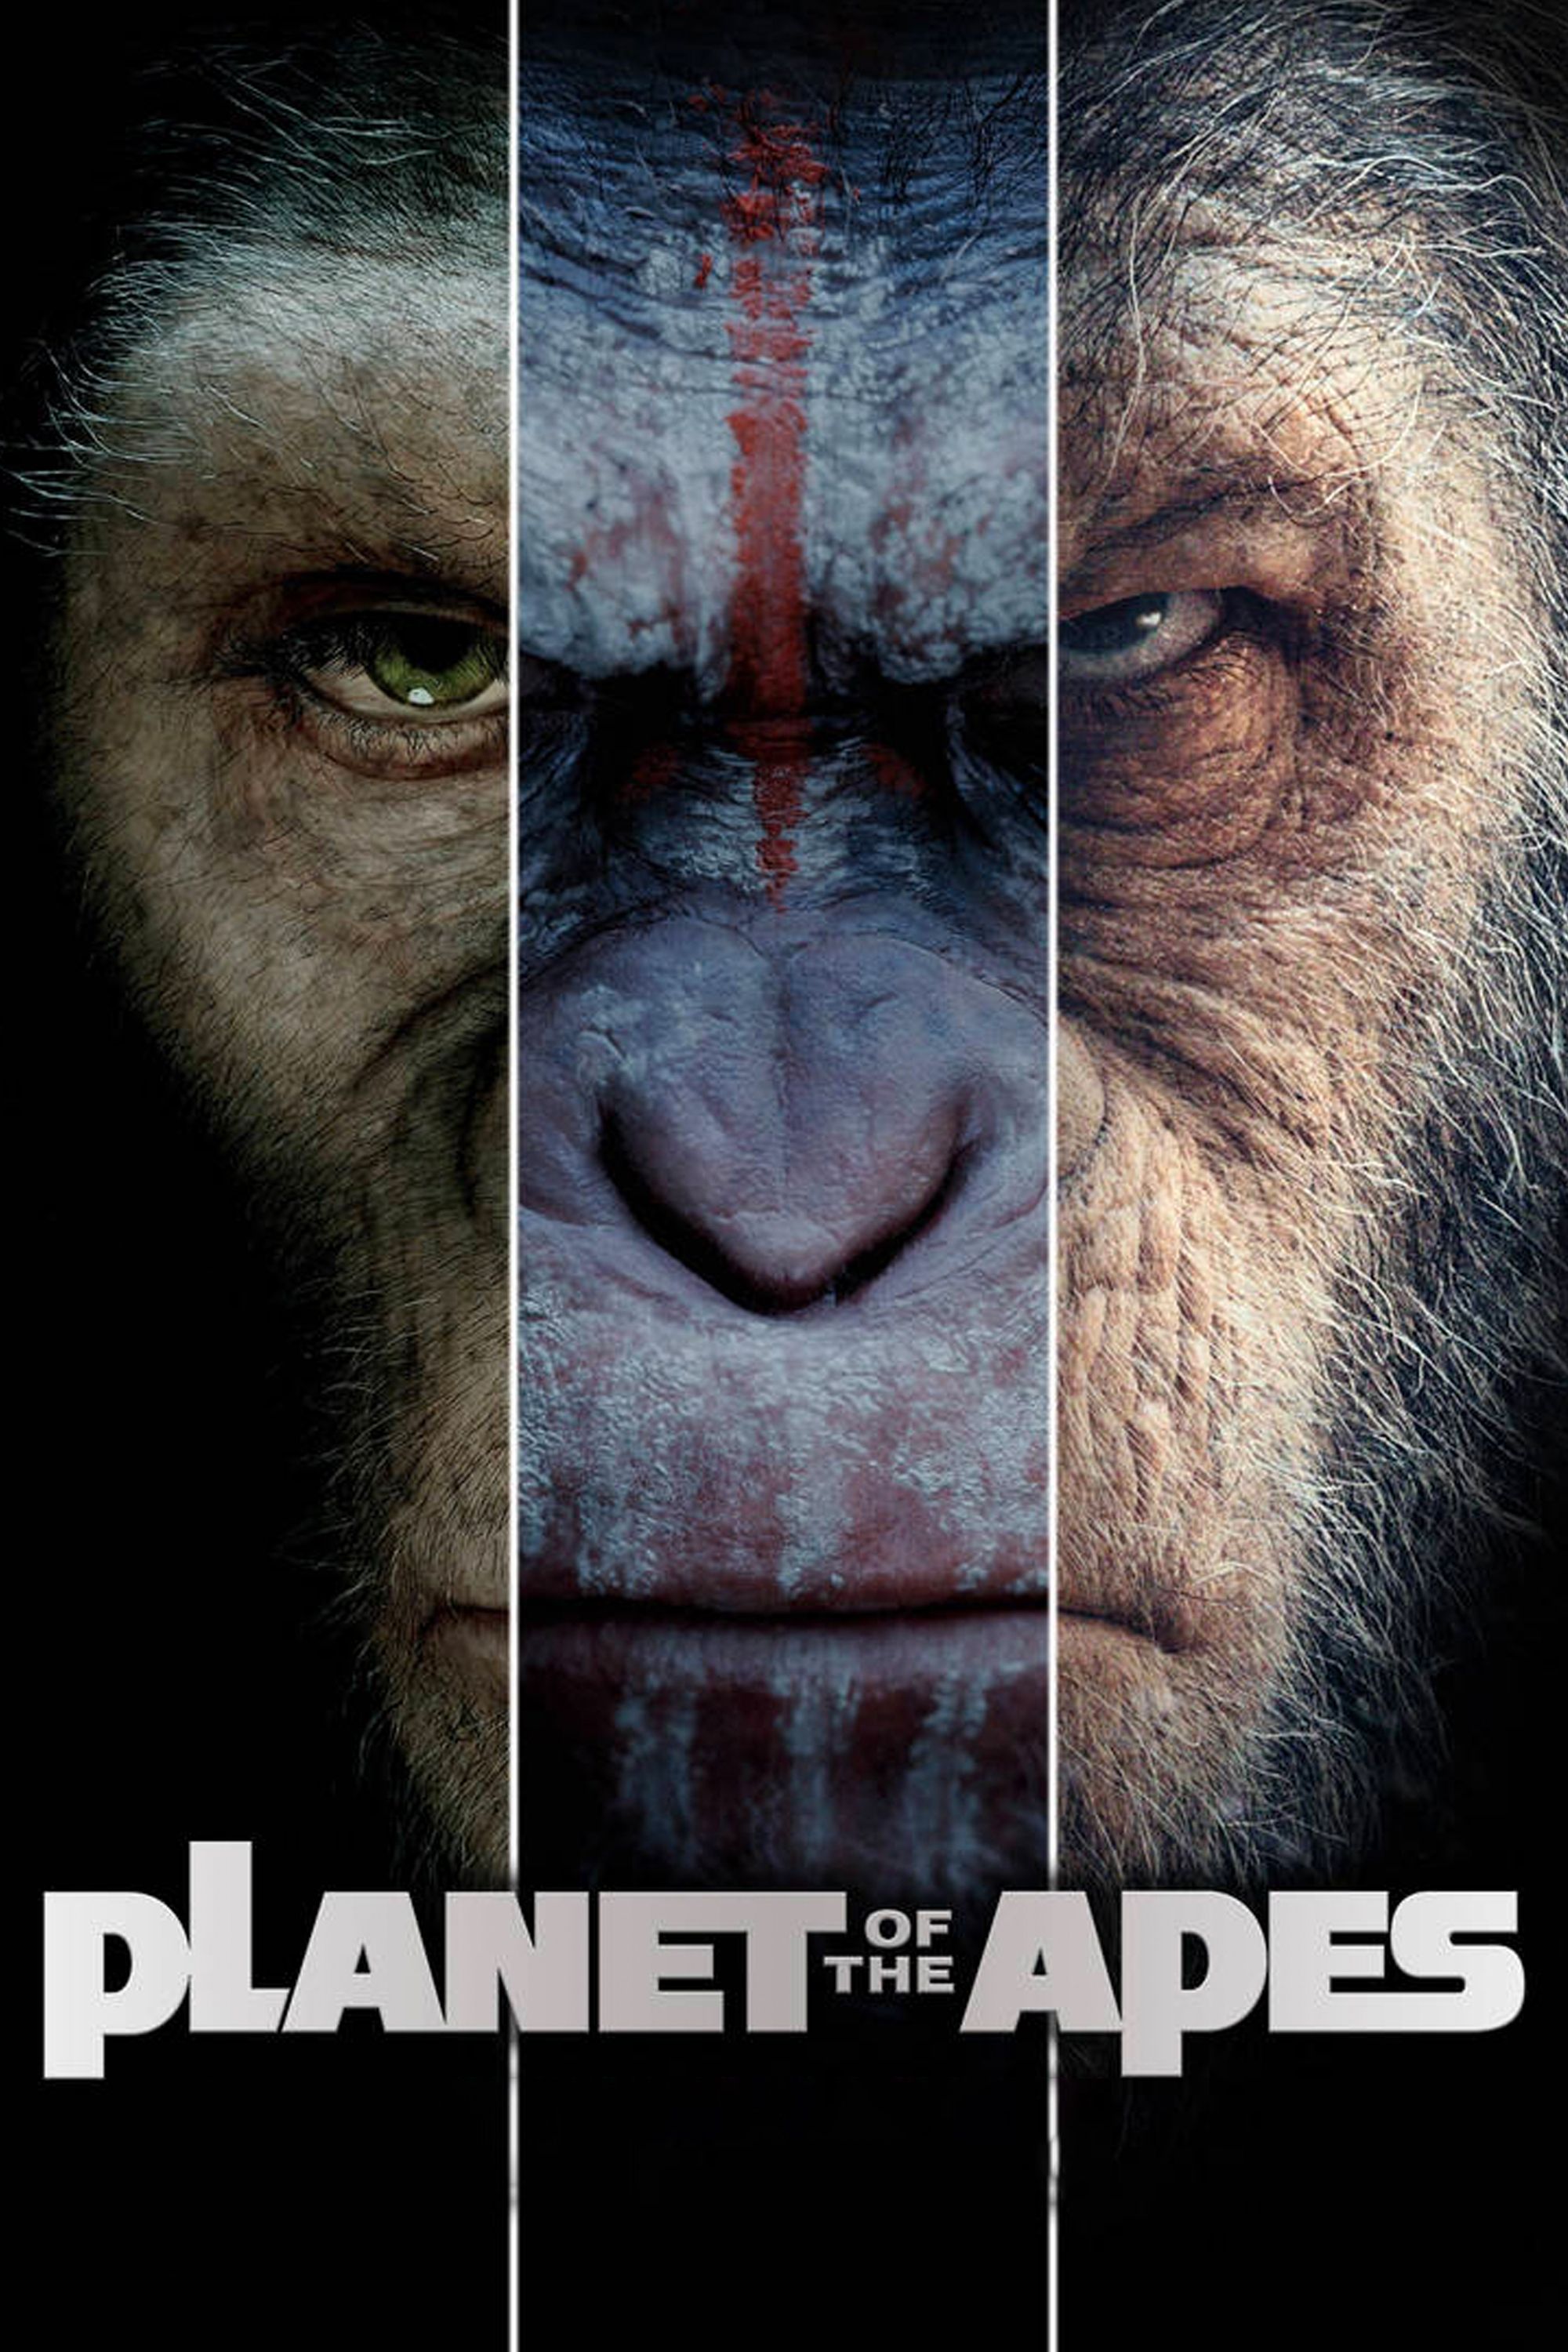 Planet of the Apes Franchise Poster